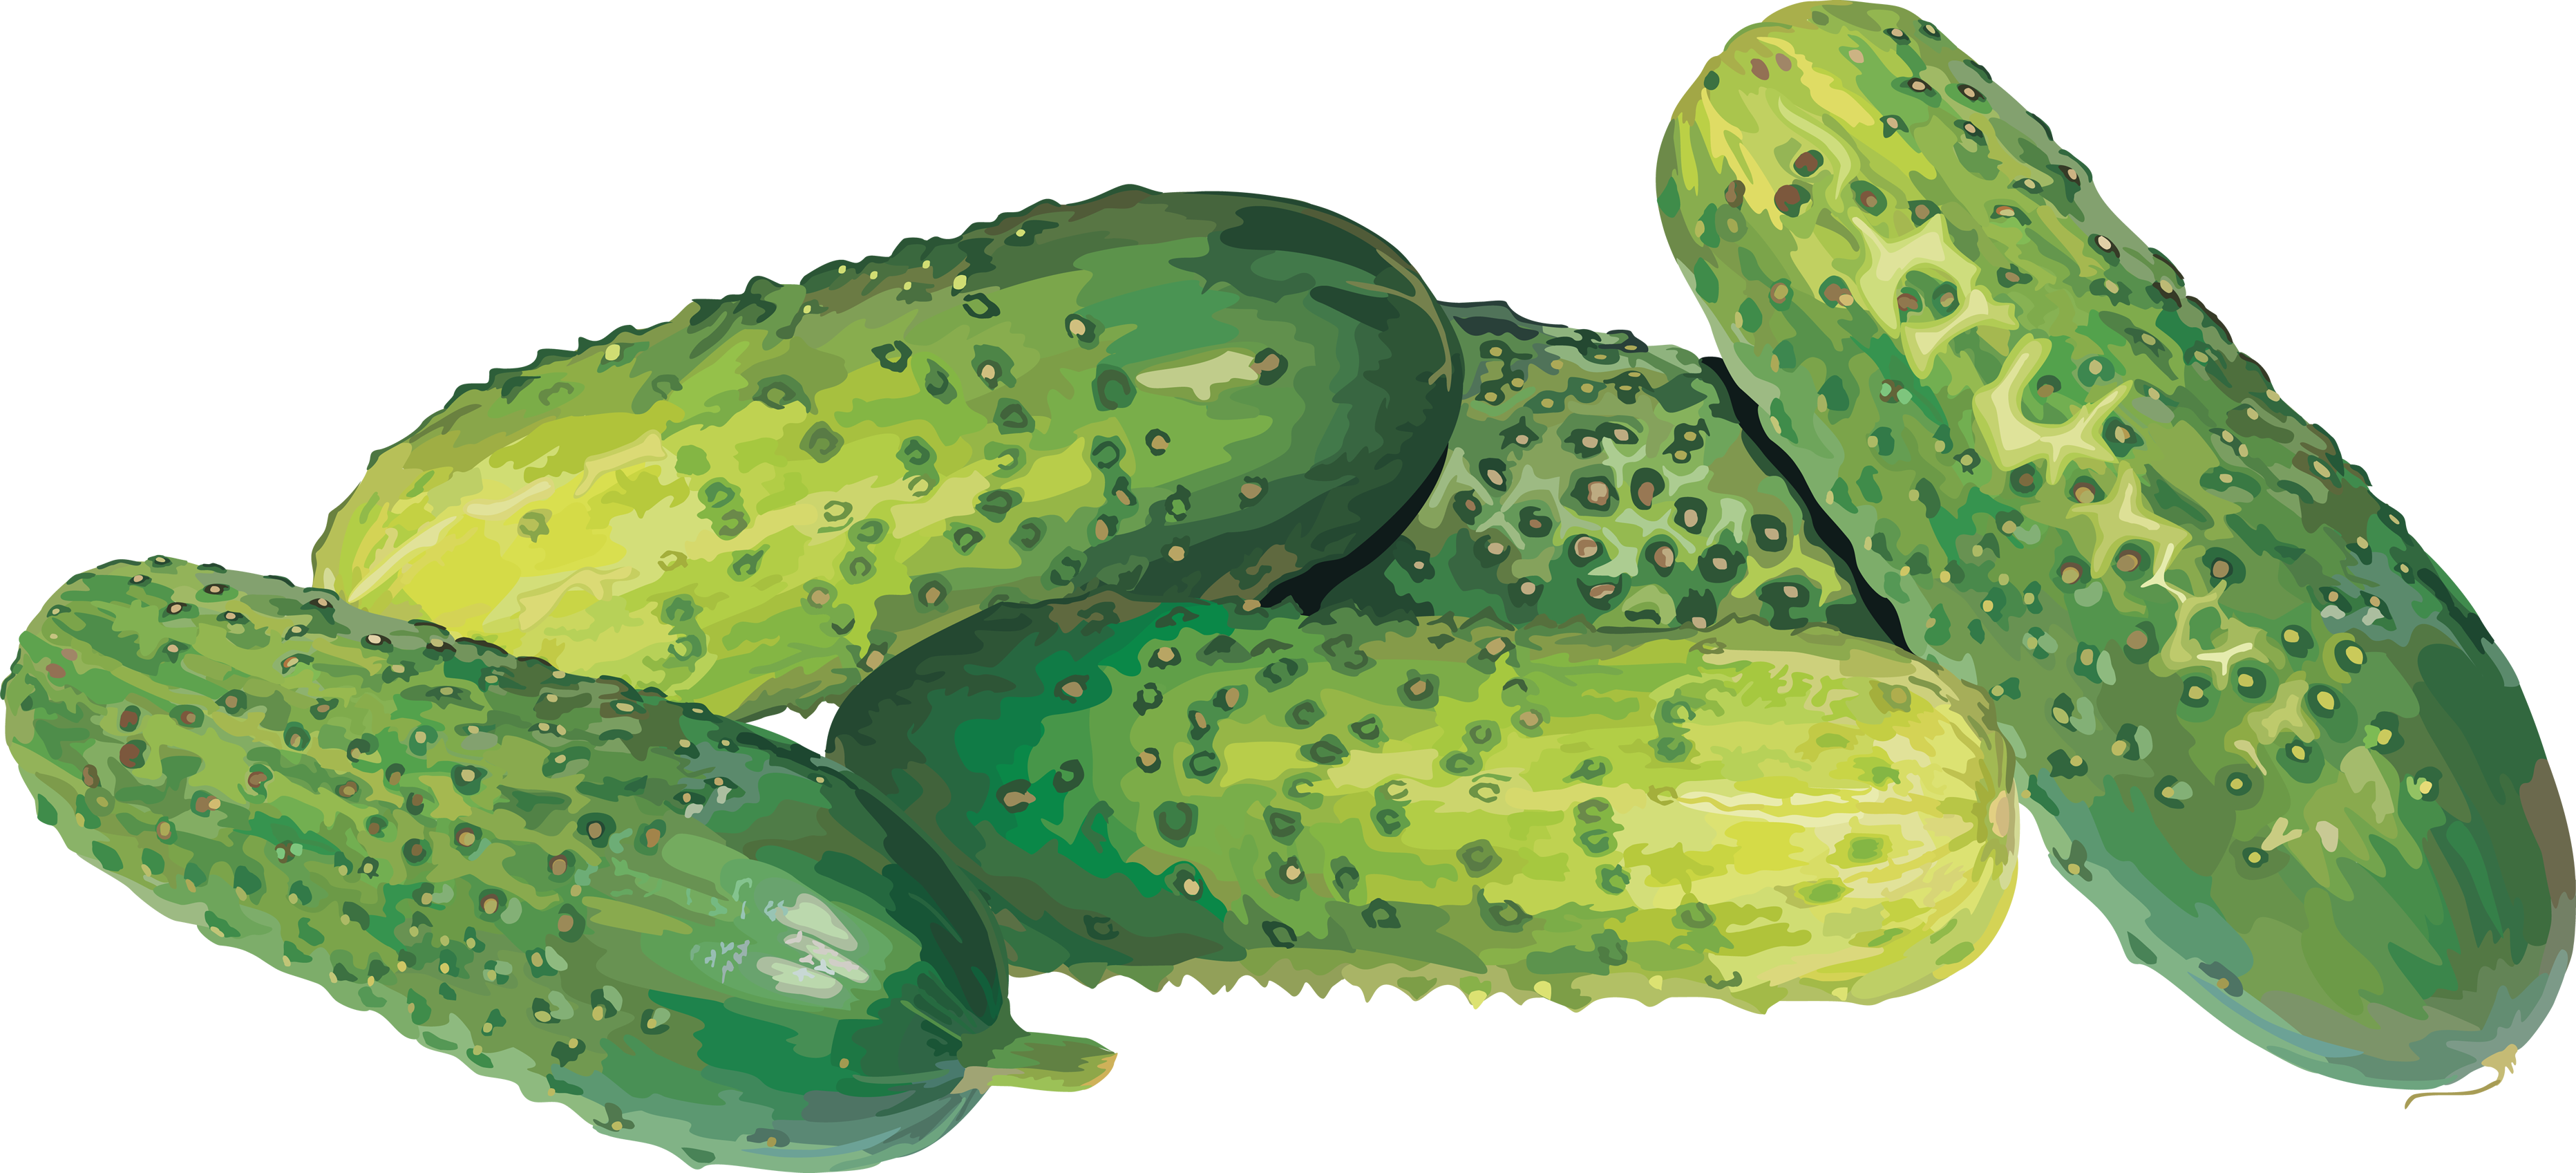 detailed picture of a pile of a cucumbers